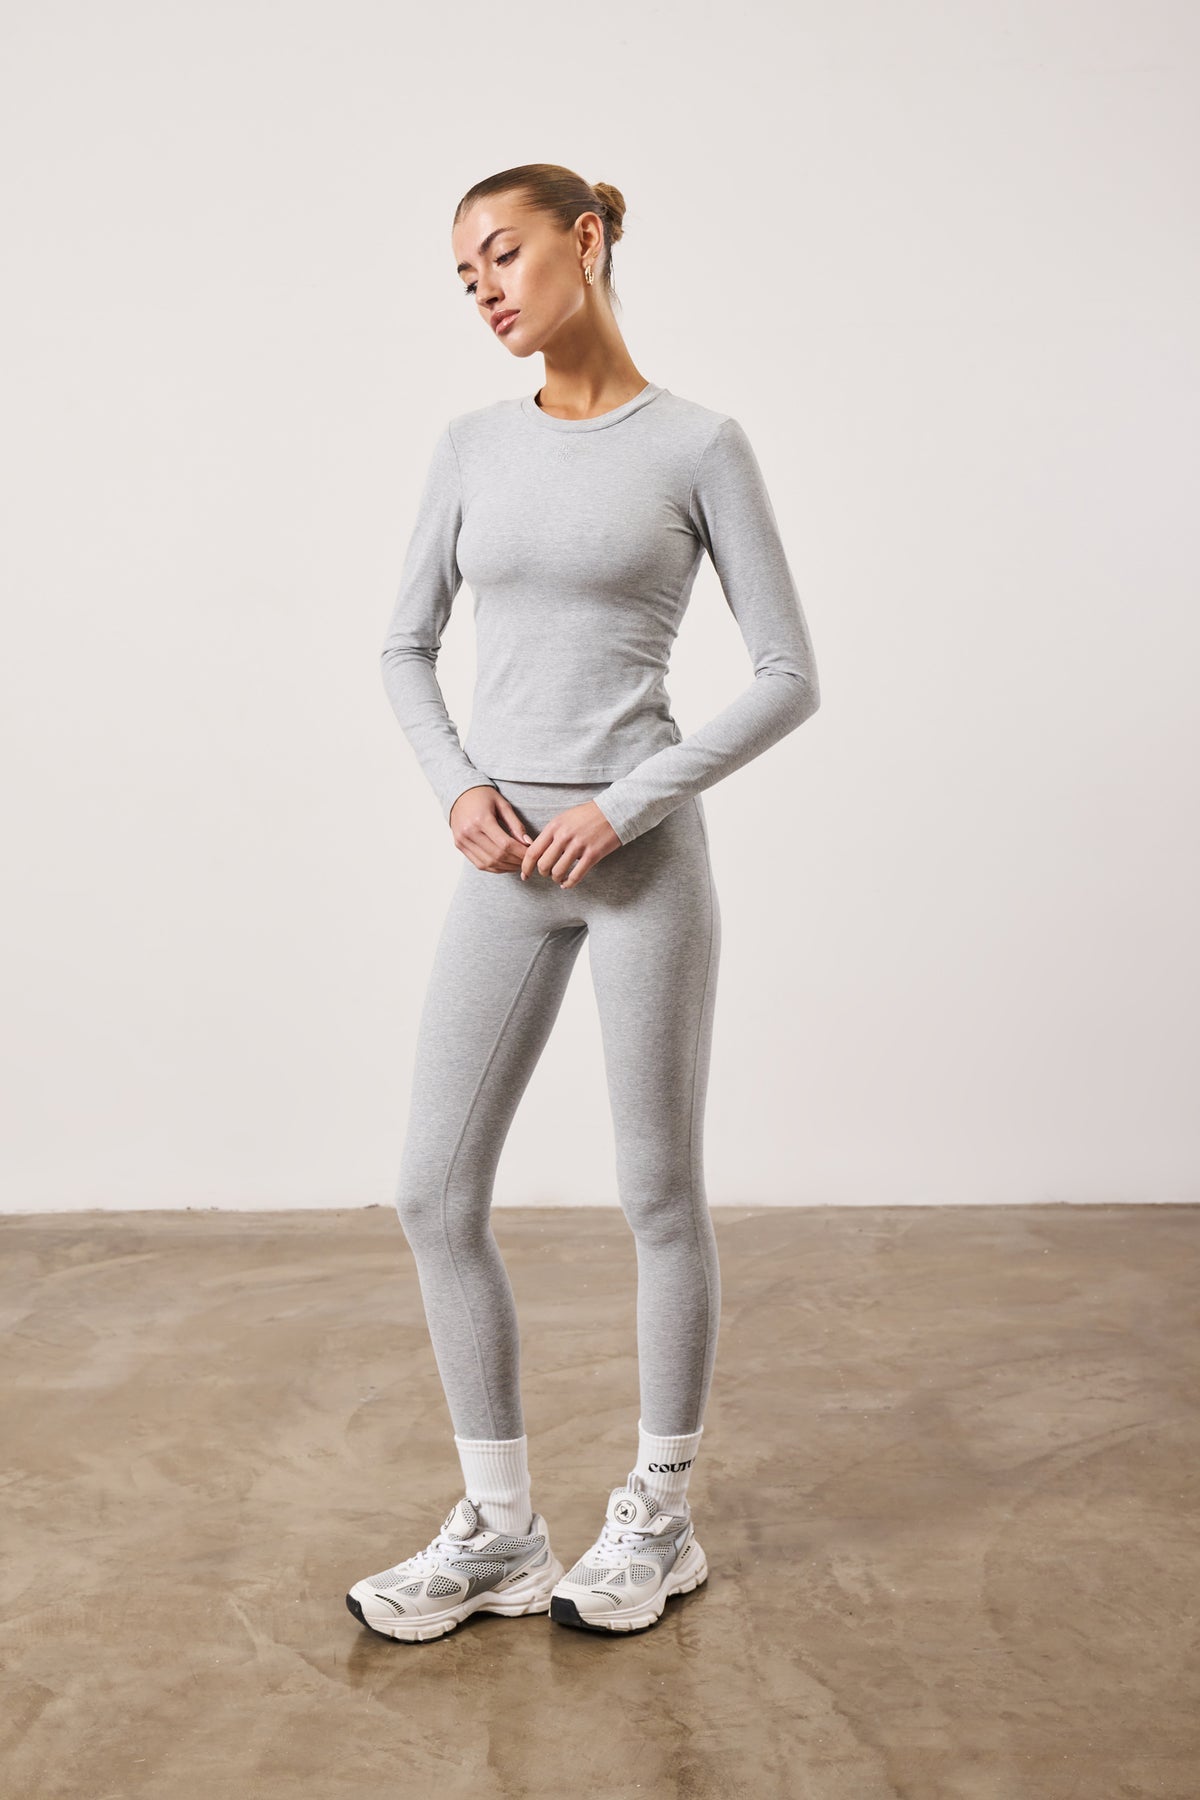 EMBLEM SOFT TOUCH JERSEY LEGGINGS - GREY MARL – The Couture Club